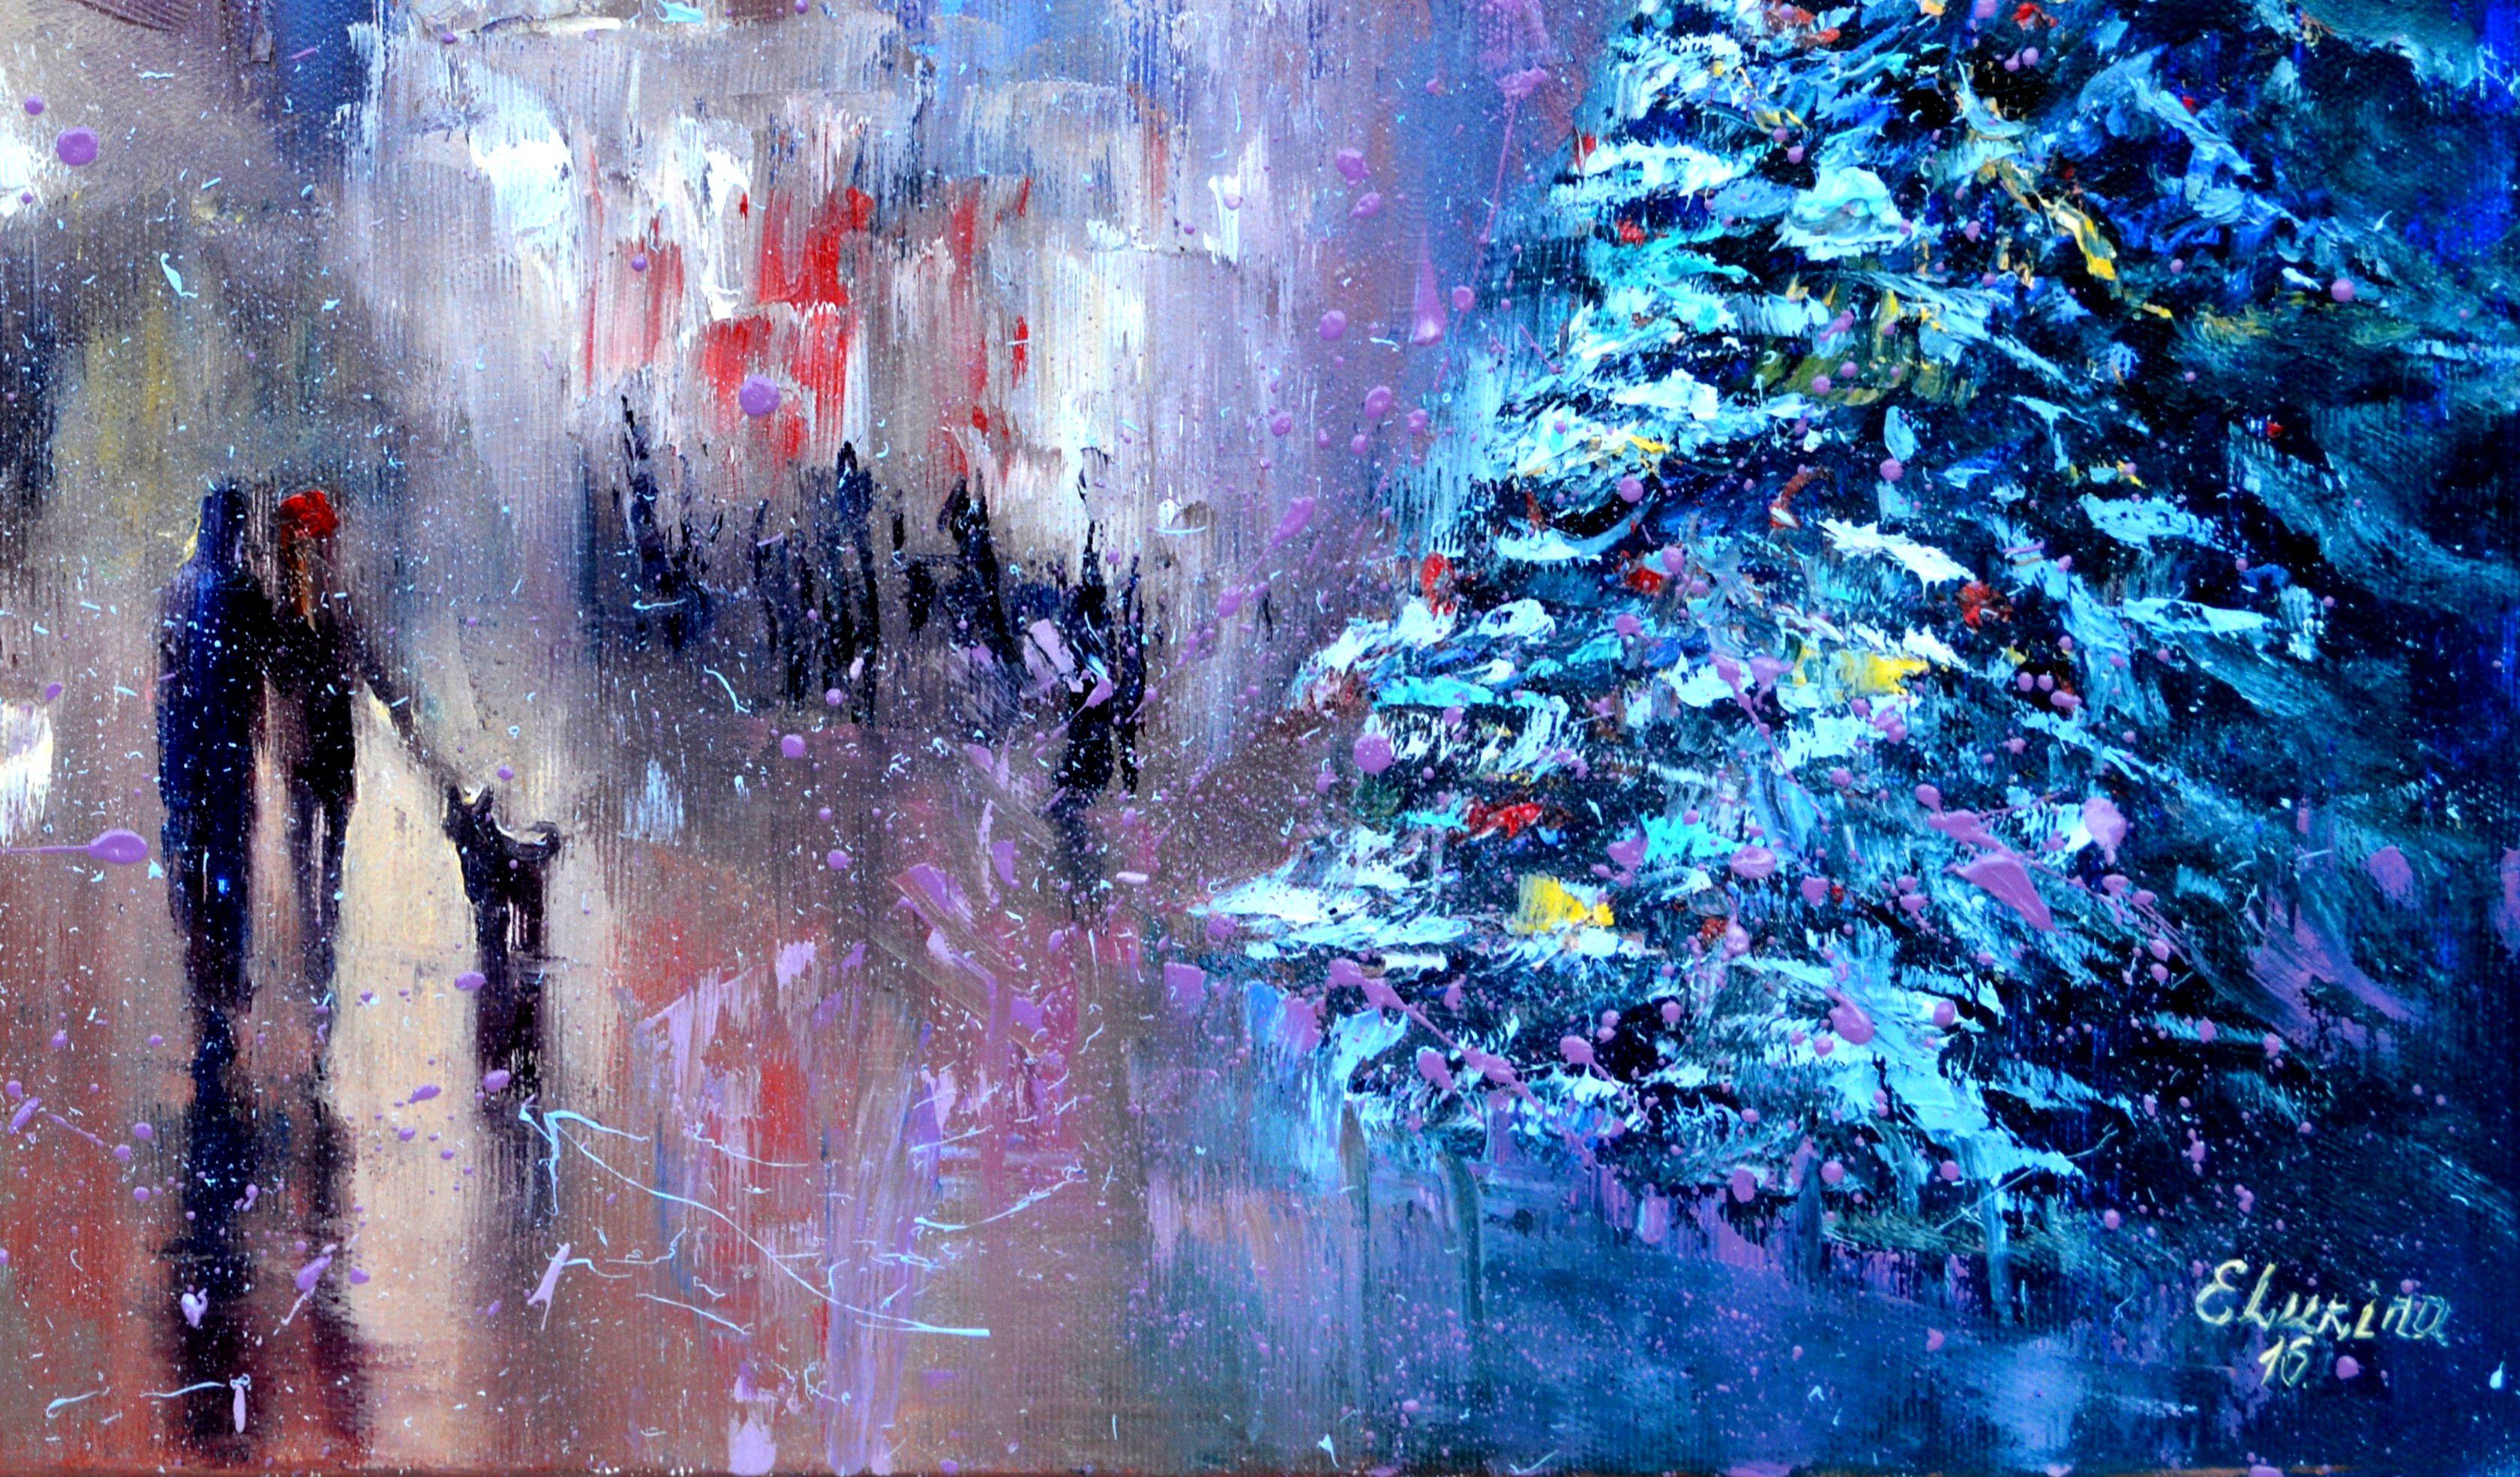 Christmas Tree at the City Hall Square 40X50 - Expressionist Painting by Elena Lukina